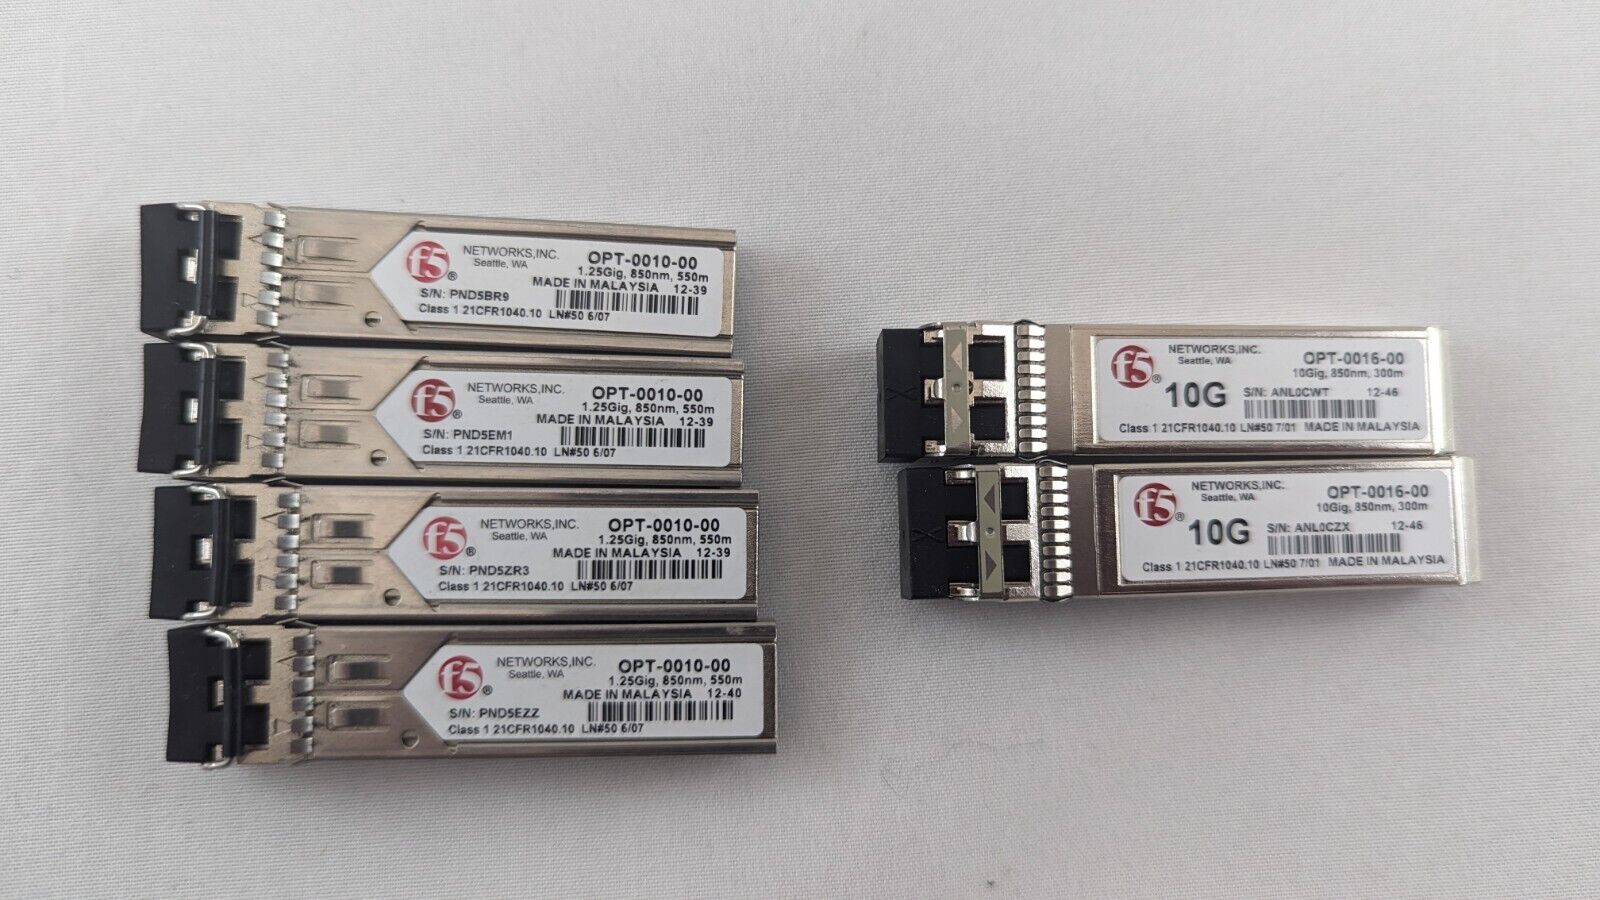 Lot of 6 F5 Networks (2) OPT-0016-00 10Gig | (4) OPT-0010-00 1.25Gig 850nm SFPs